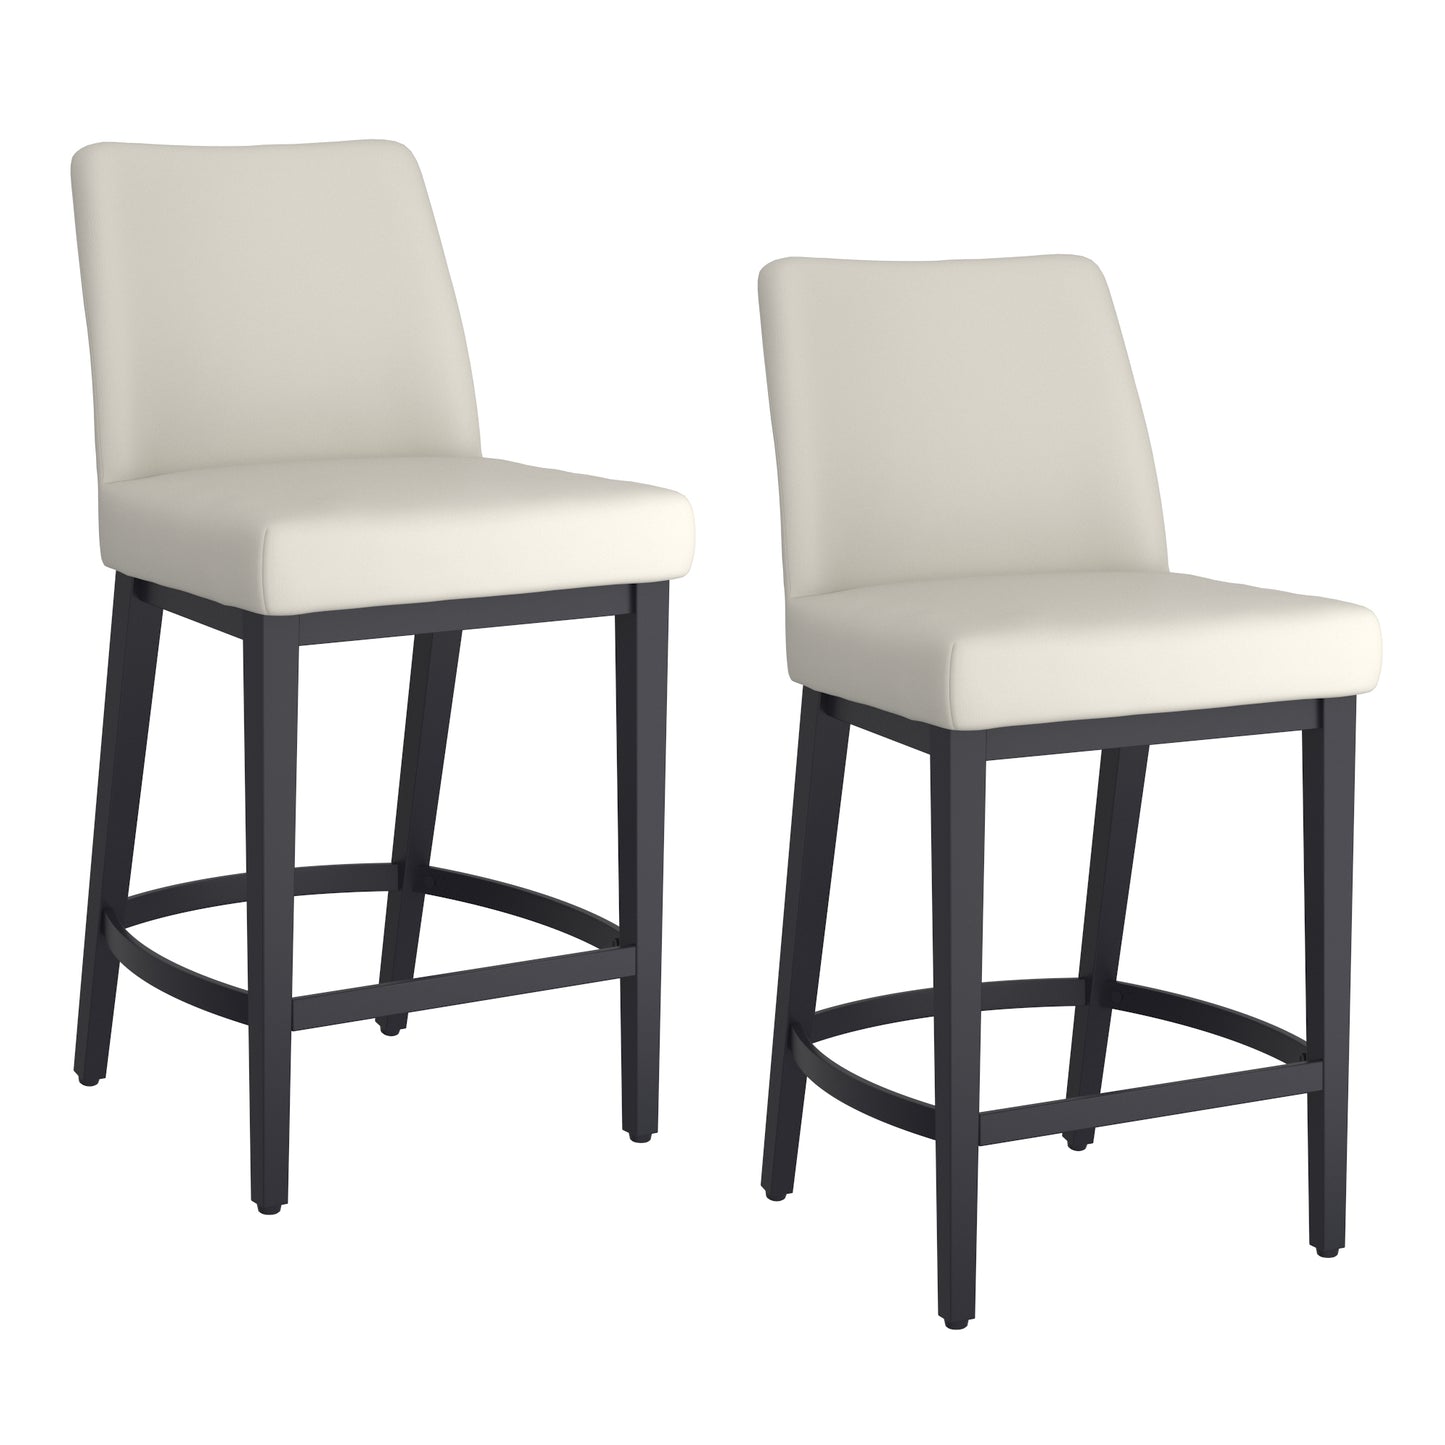 Jace 26" Counter Stool, Set of 2, in Beige Faux Leather and Black